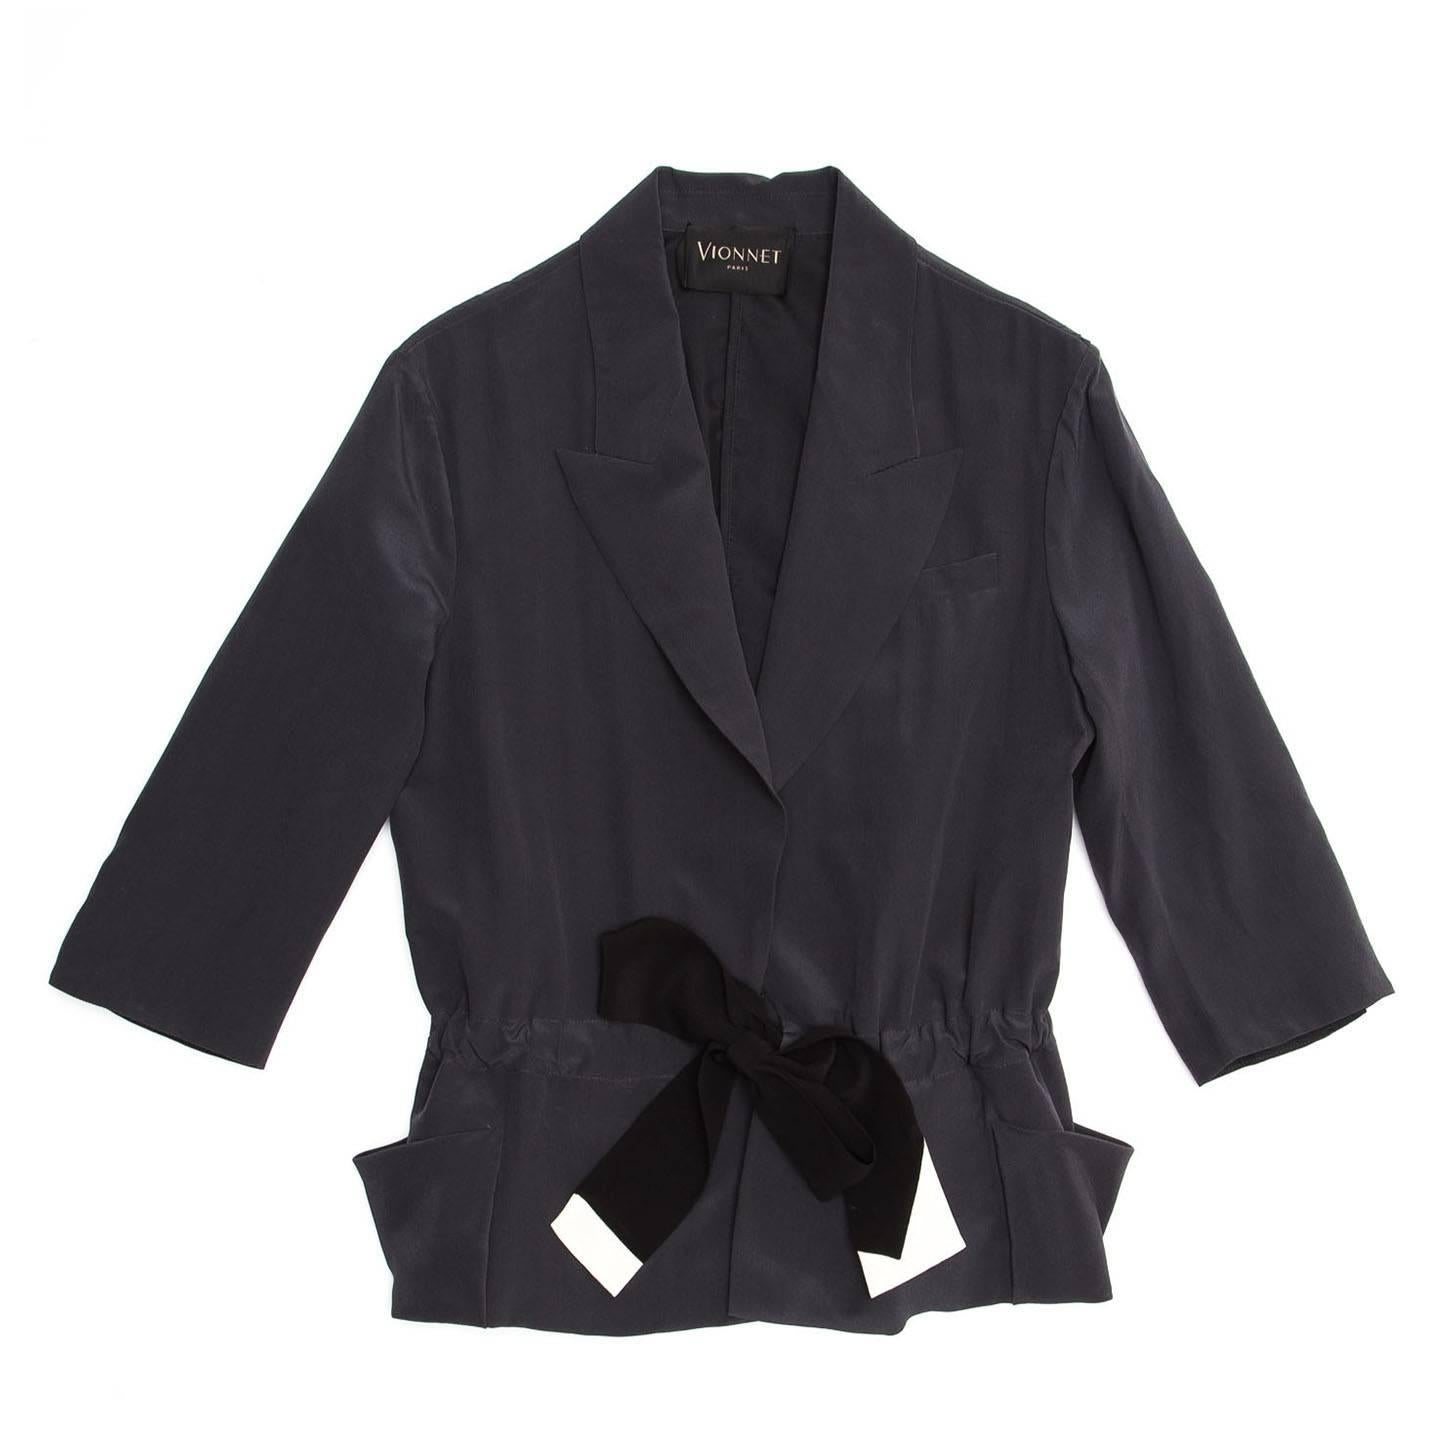 Elegant dark grey silk crepe jacket with 3/4 sleeves and a black and ivory ribbon drawstring that accentuates the waist. The black silk belt is visible at back, while is concealed at front where it gathers the body fabric creating volume and fastens